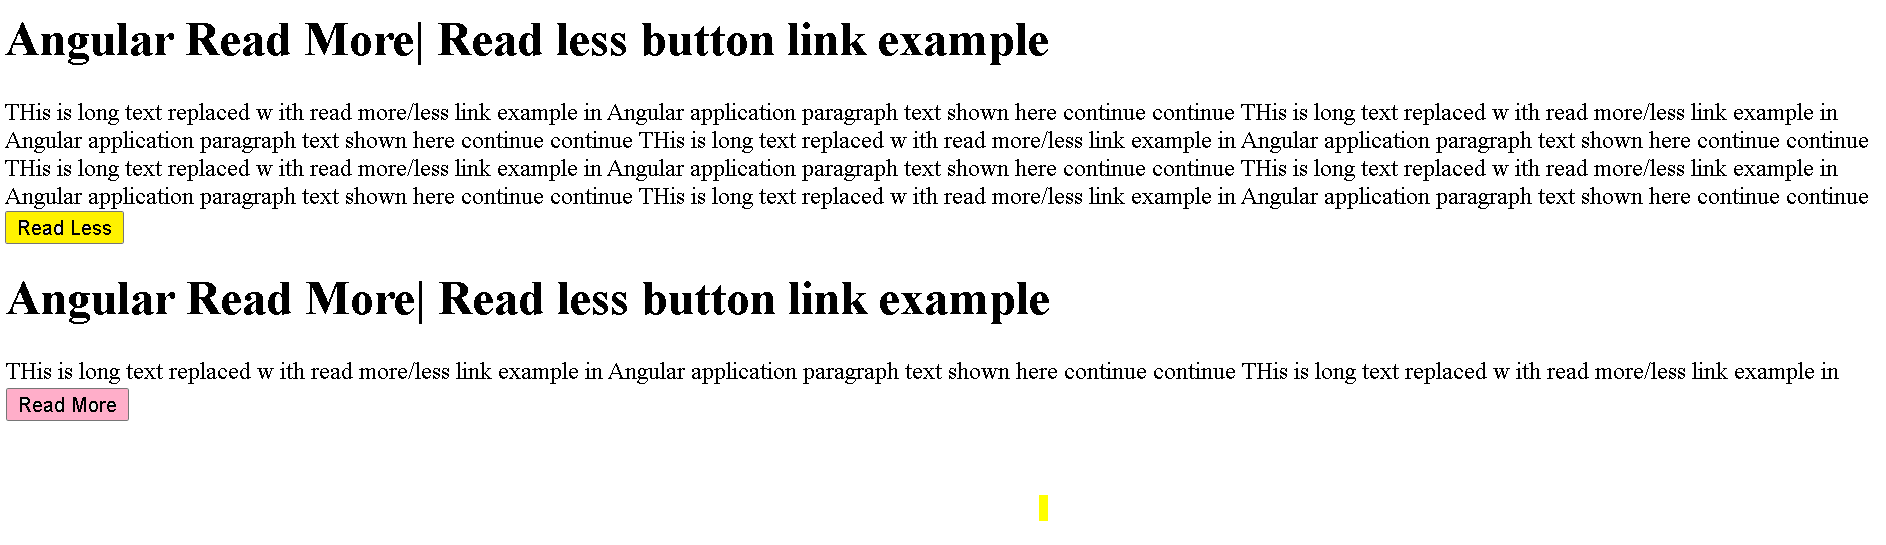 Angular Read More/less button of a long text example